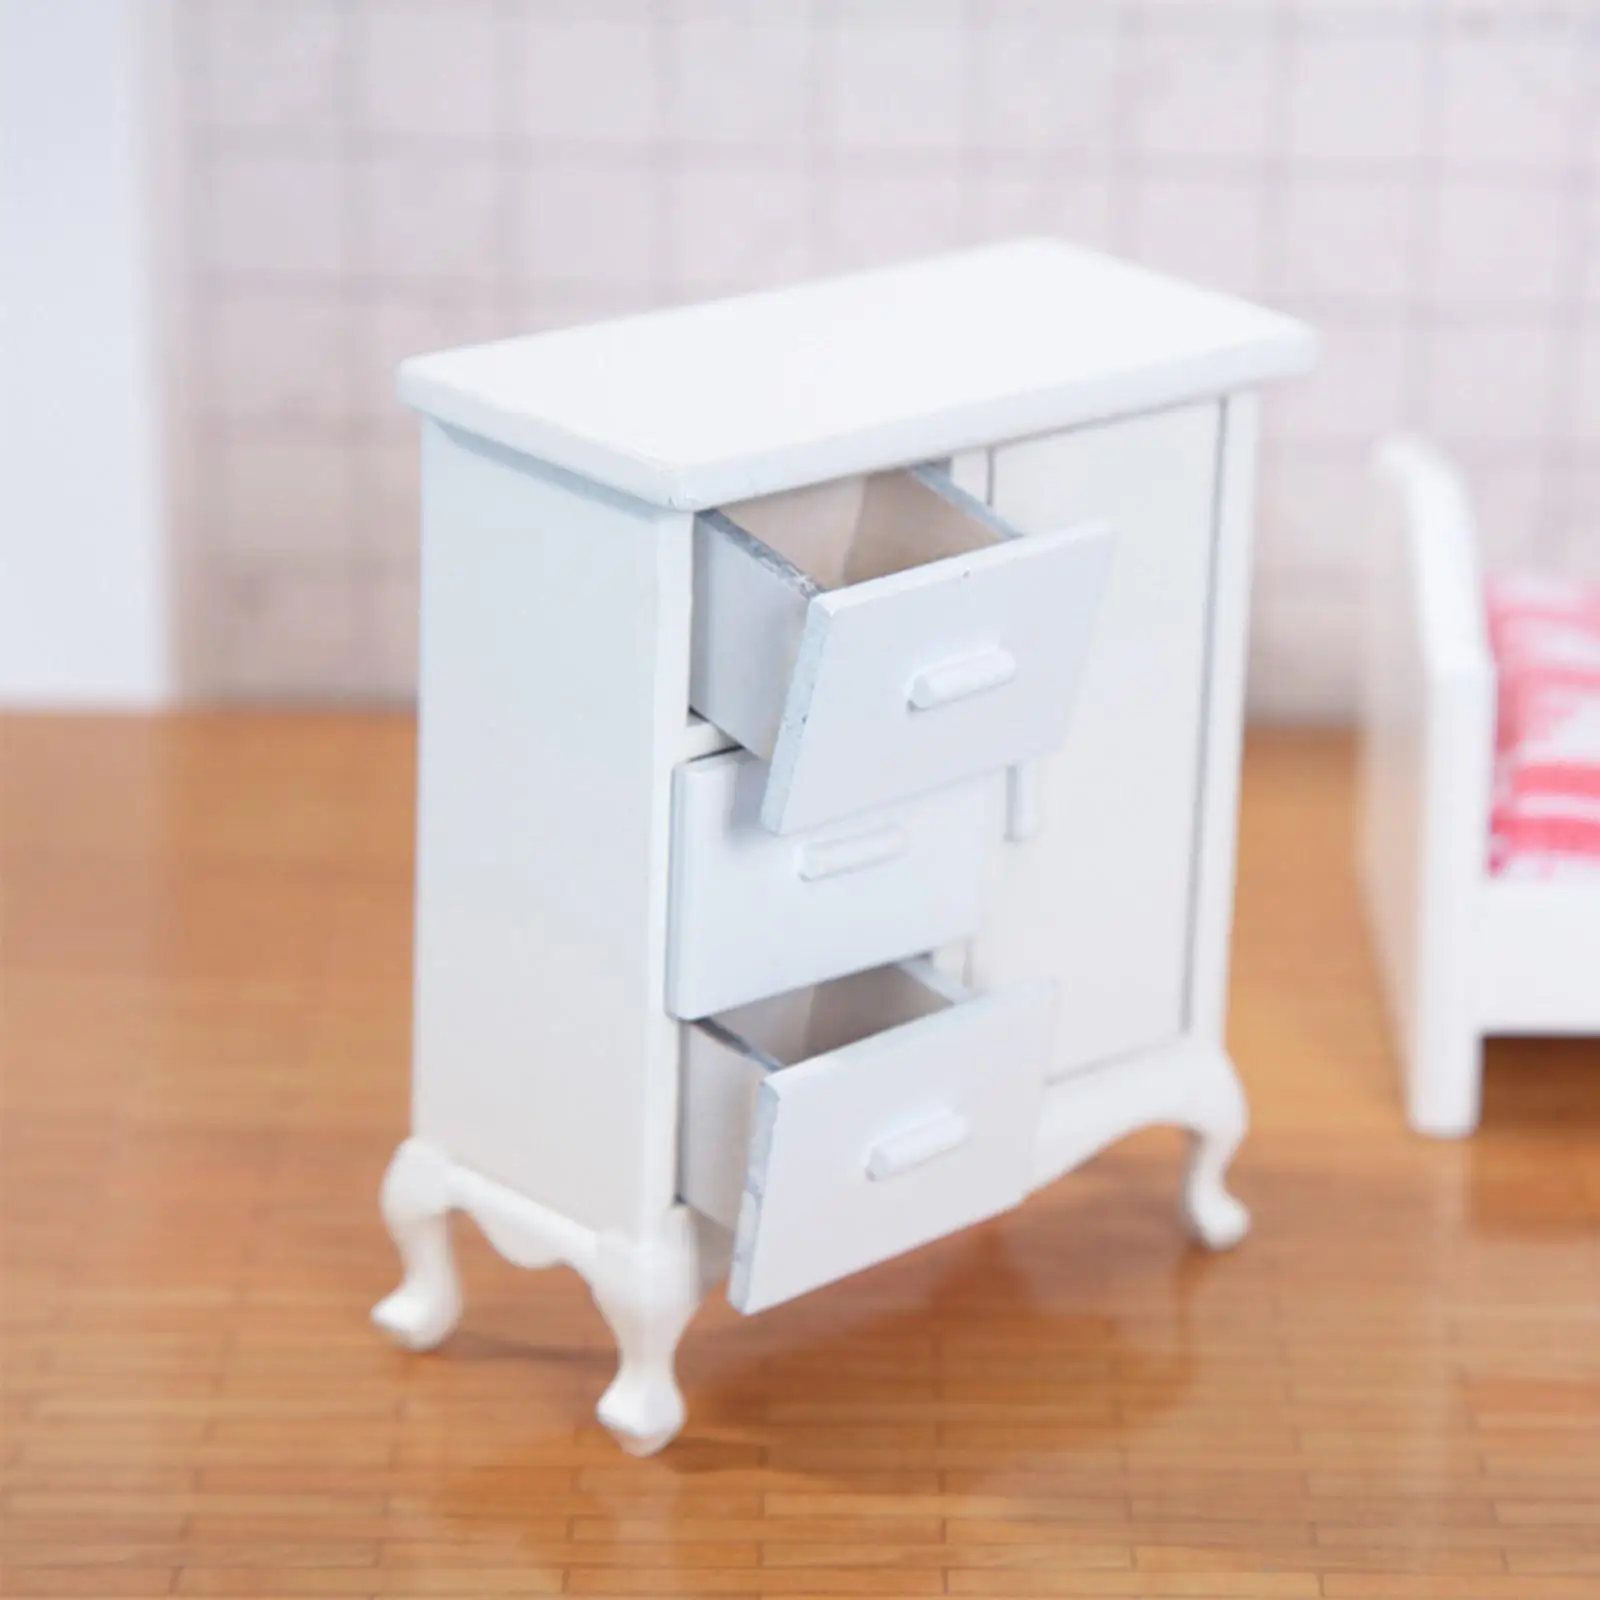 Miniature Furniture Room Miniature Wooden Dollhouse Cabinet for Life Scene Layout Window Display Handcraft Role Play DIY Model